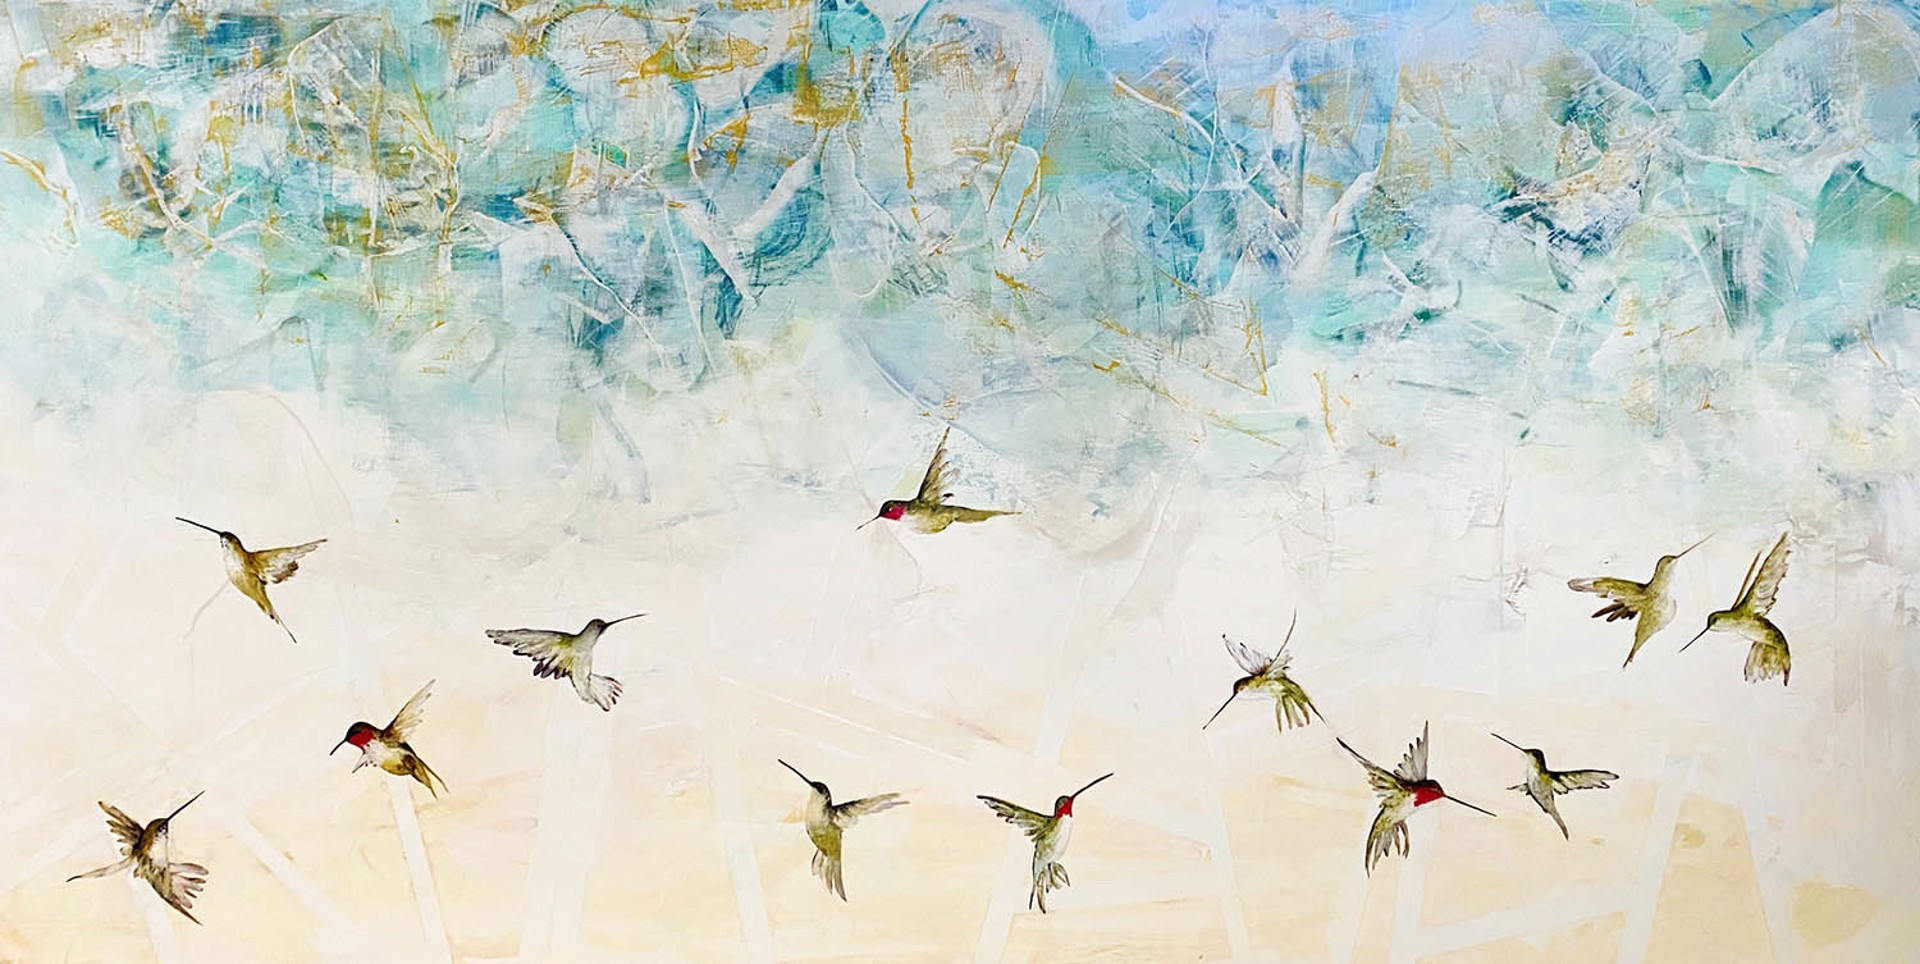 Original Oil Painting By Jenna Von Benedikt Featuring A Flurry Of Hummingbirds In Flight Over Abstract Turquoise To Yellow Gradient Background With Geometric Tape Details